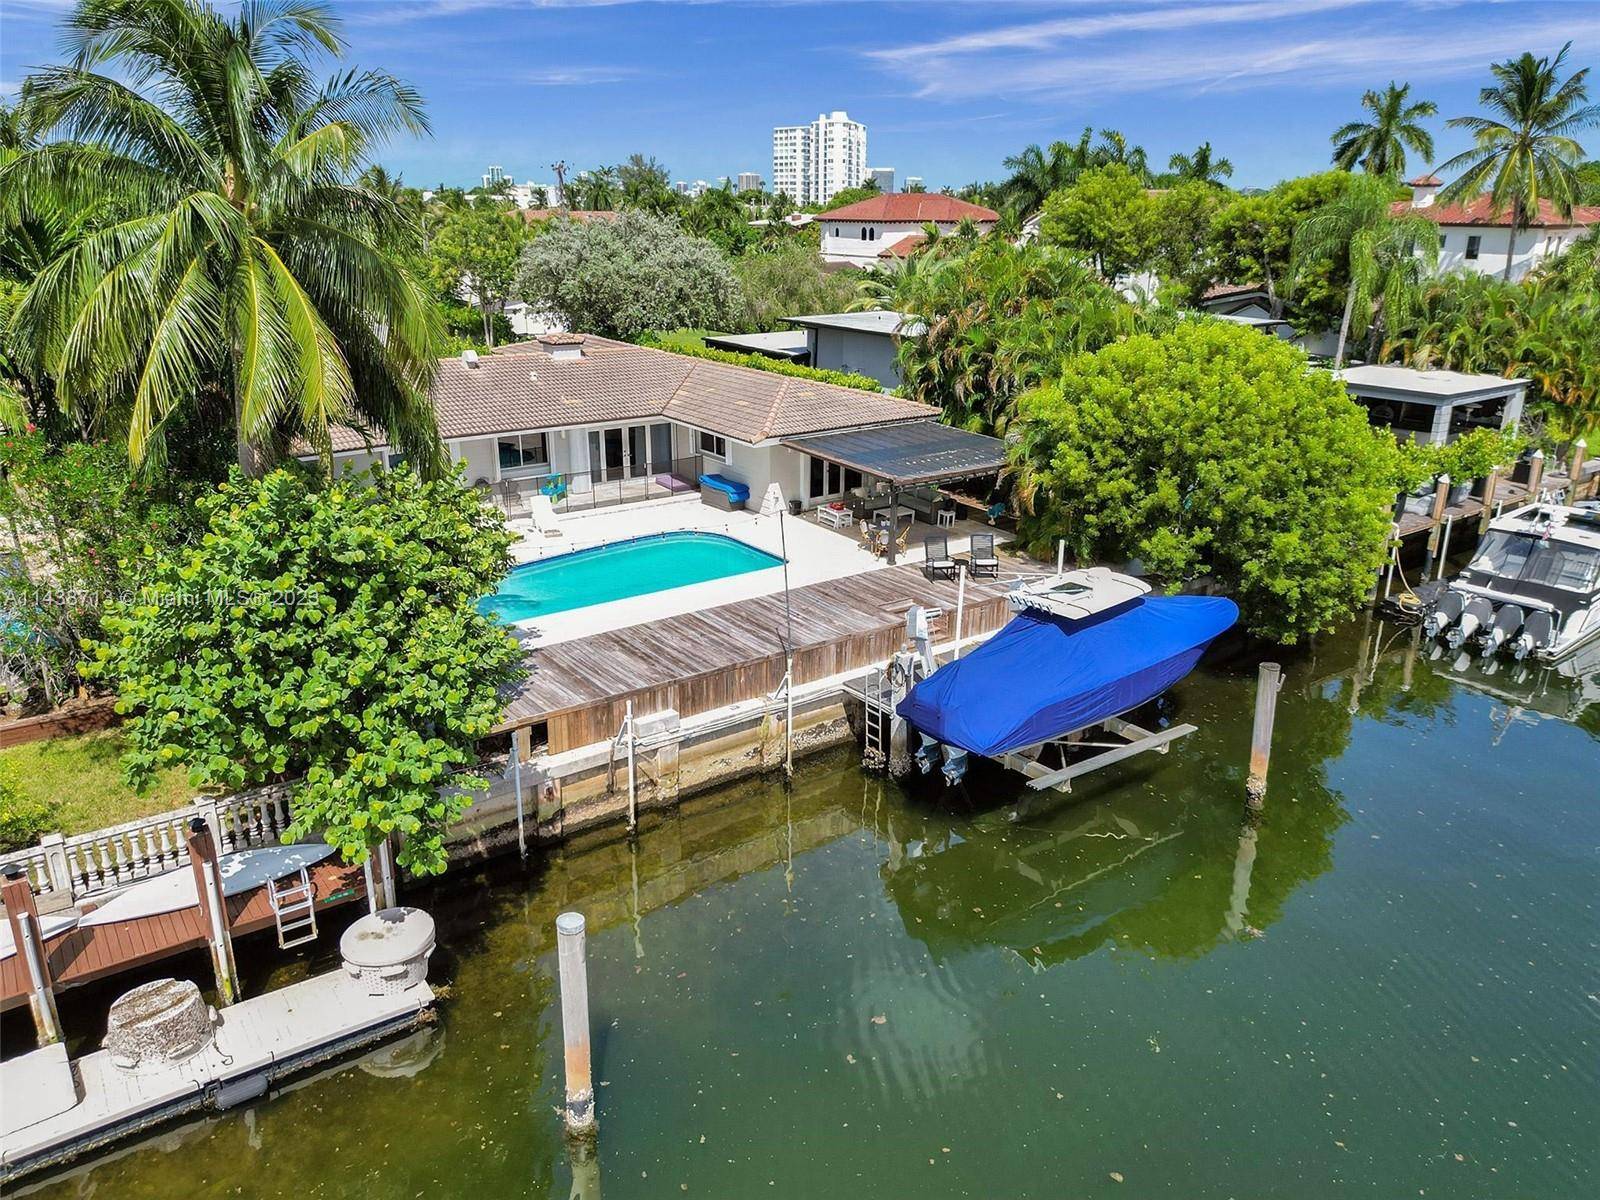 Be ready to fall in love with this beautifully remodeled waterfront home located in the exclusive gated community of Sans Souci Estates.